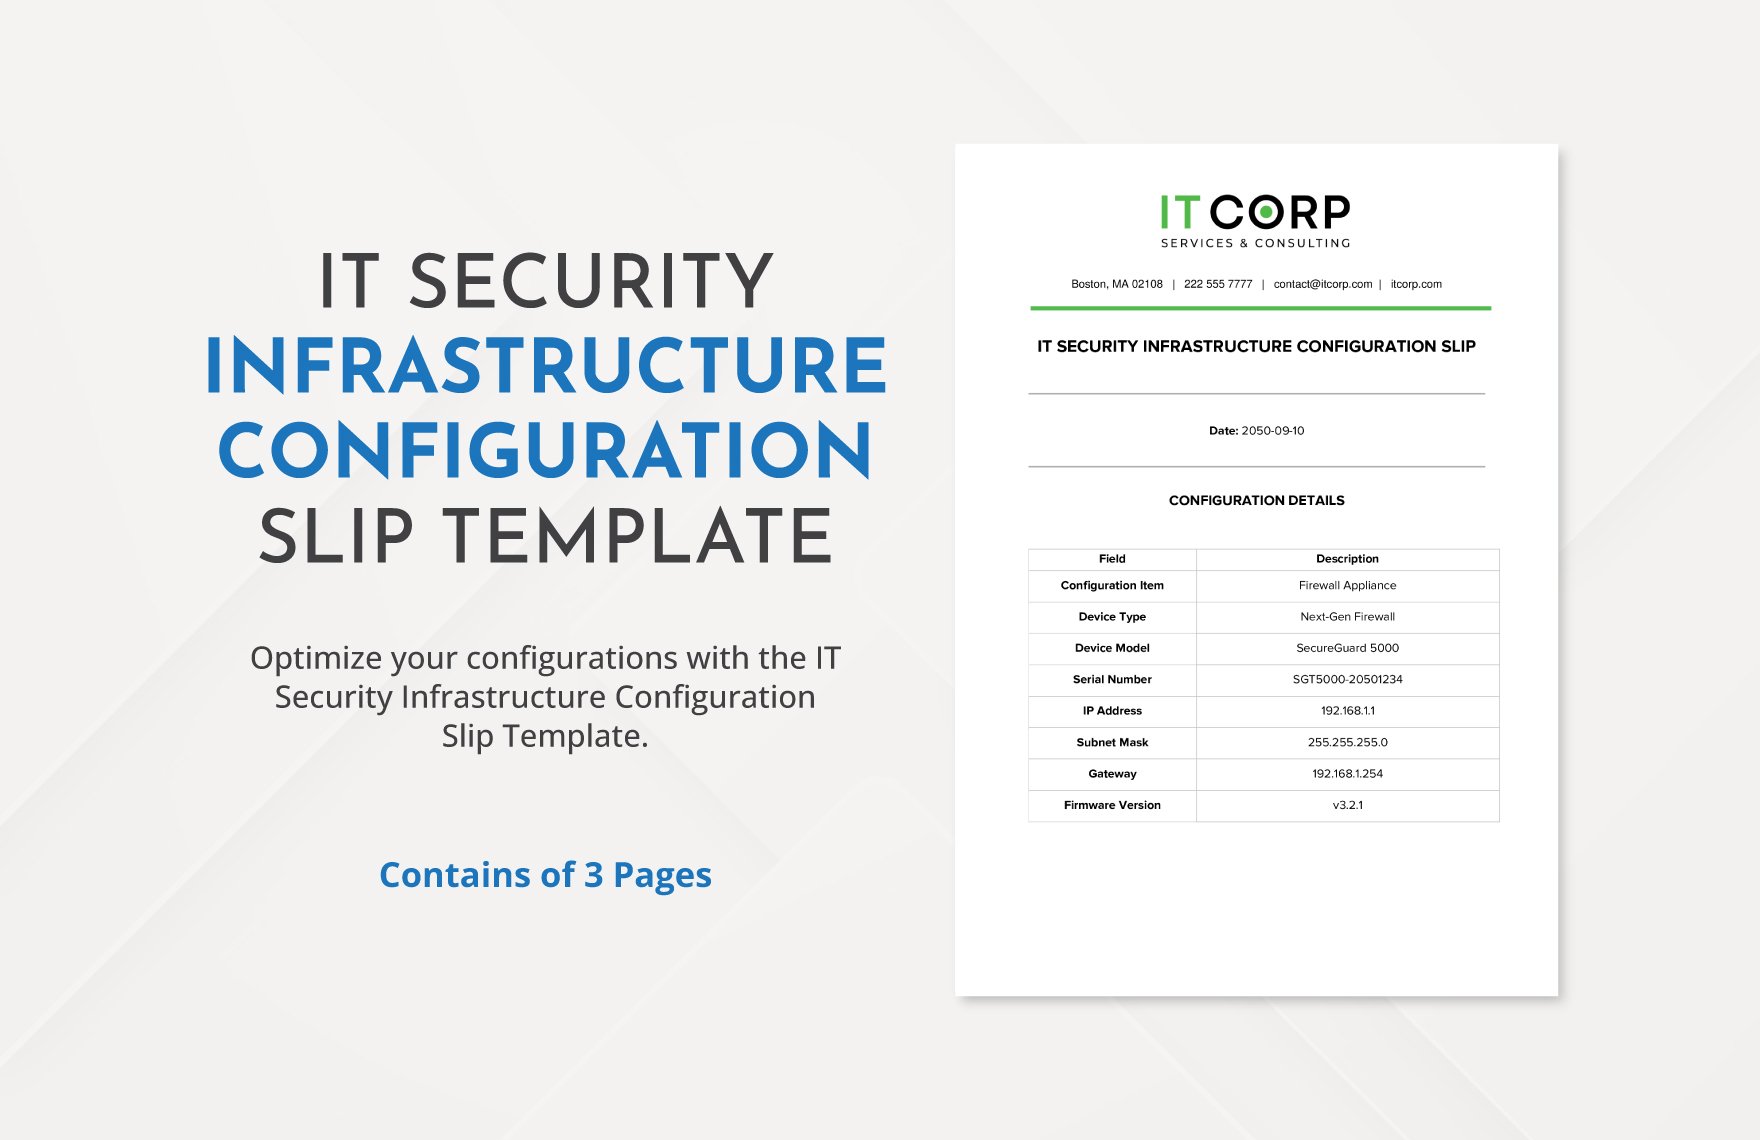 IT Security Infrastructure Configuration Slip Template